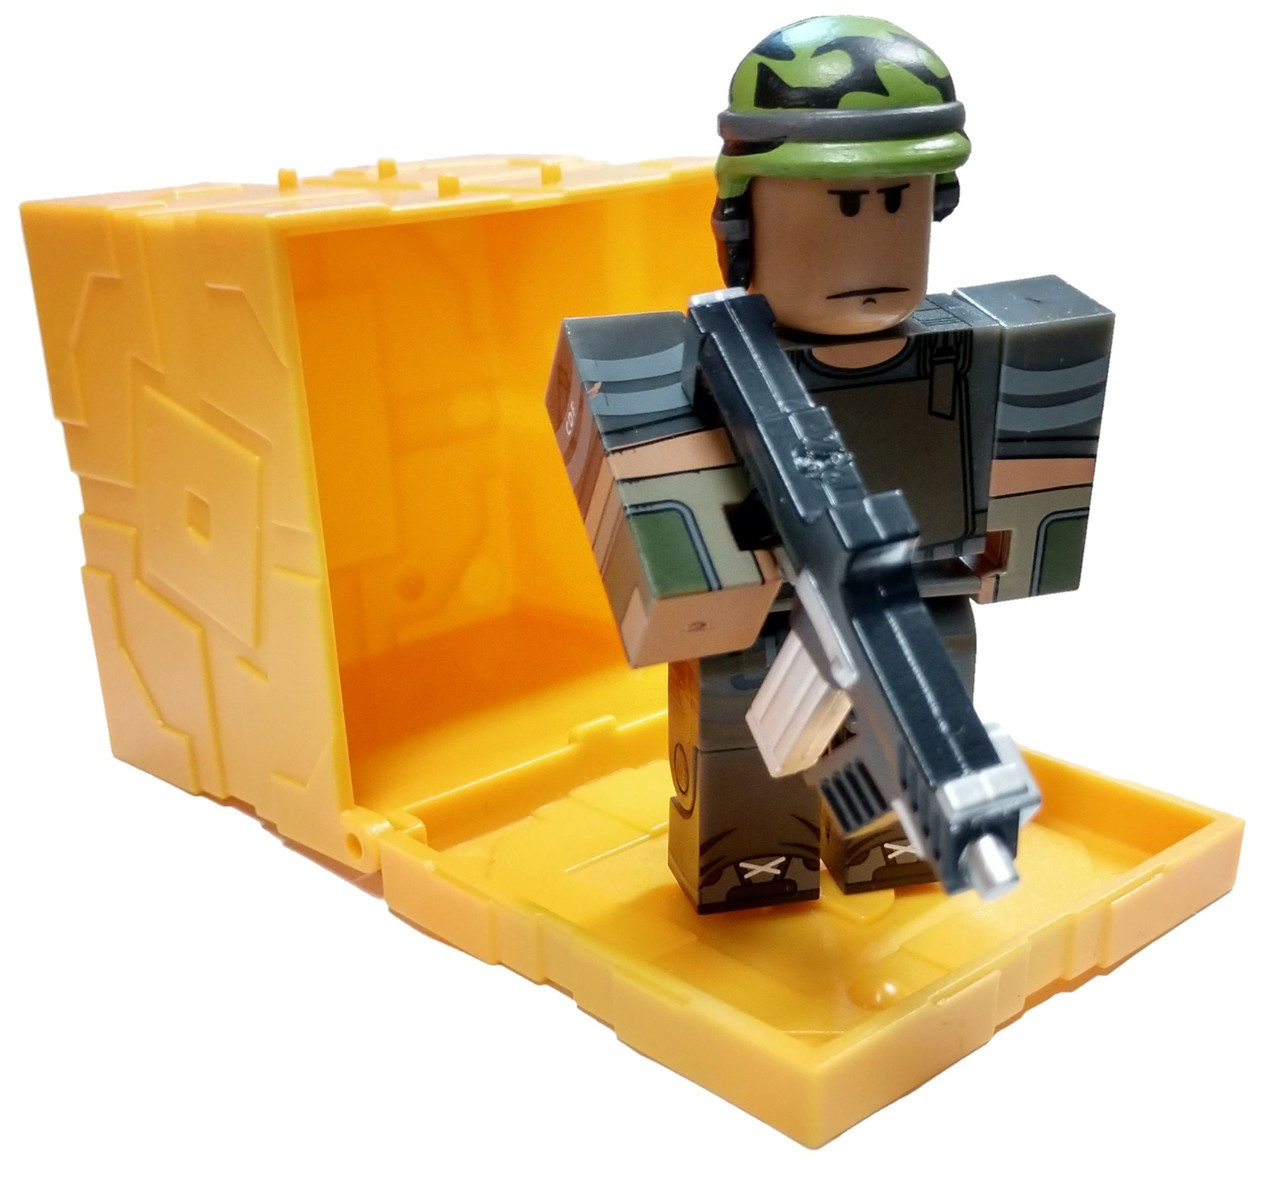 Roblox Series 5 After The Flash Cdf Soldier 3 Mini Figure With Gold Cube And Online Code Loose Jazwares Toywiz - roblox series 7 mystery box after the flash super soldier jazwares in 2020 roblox super soldier mystery box